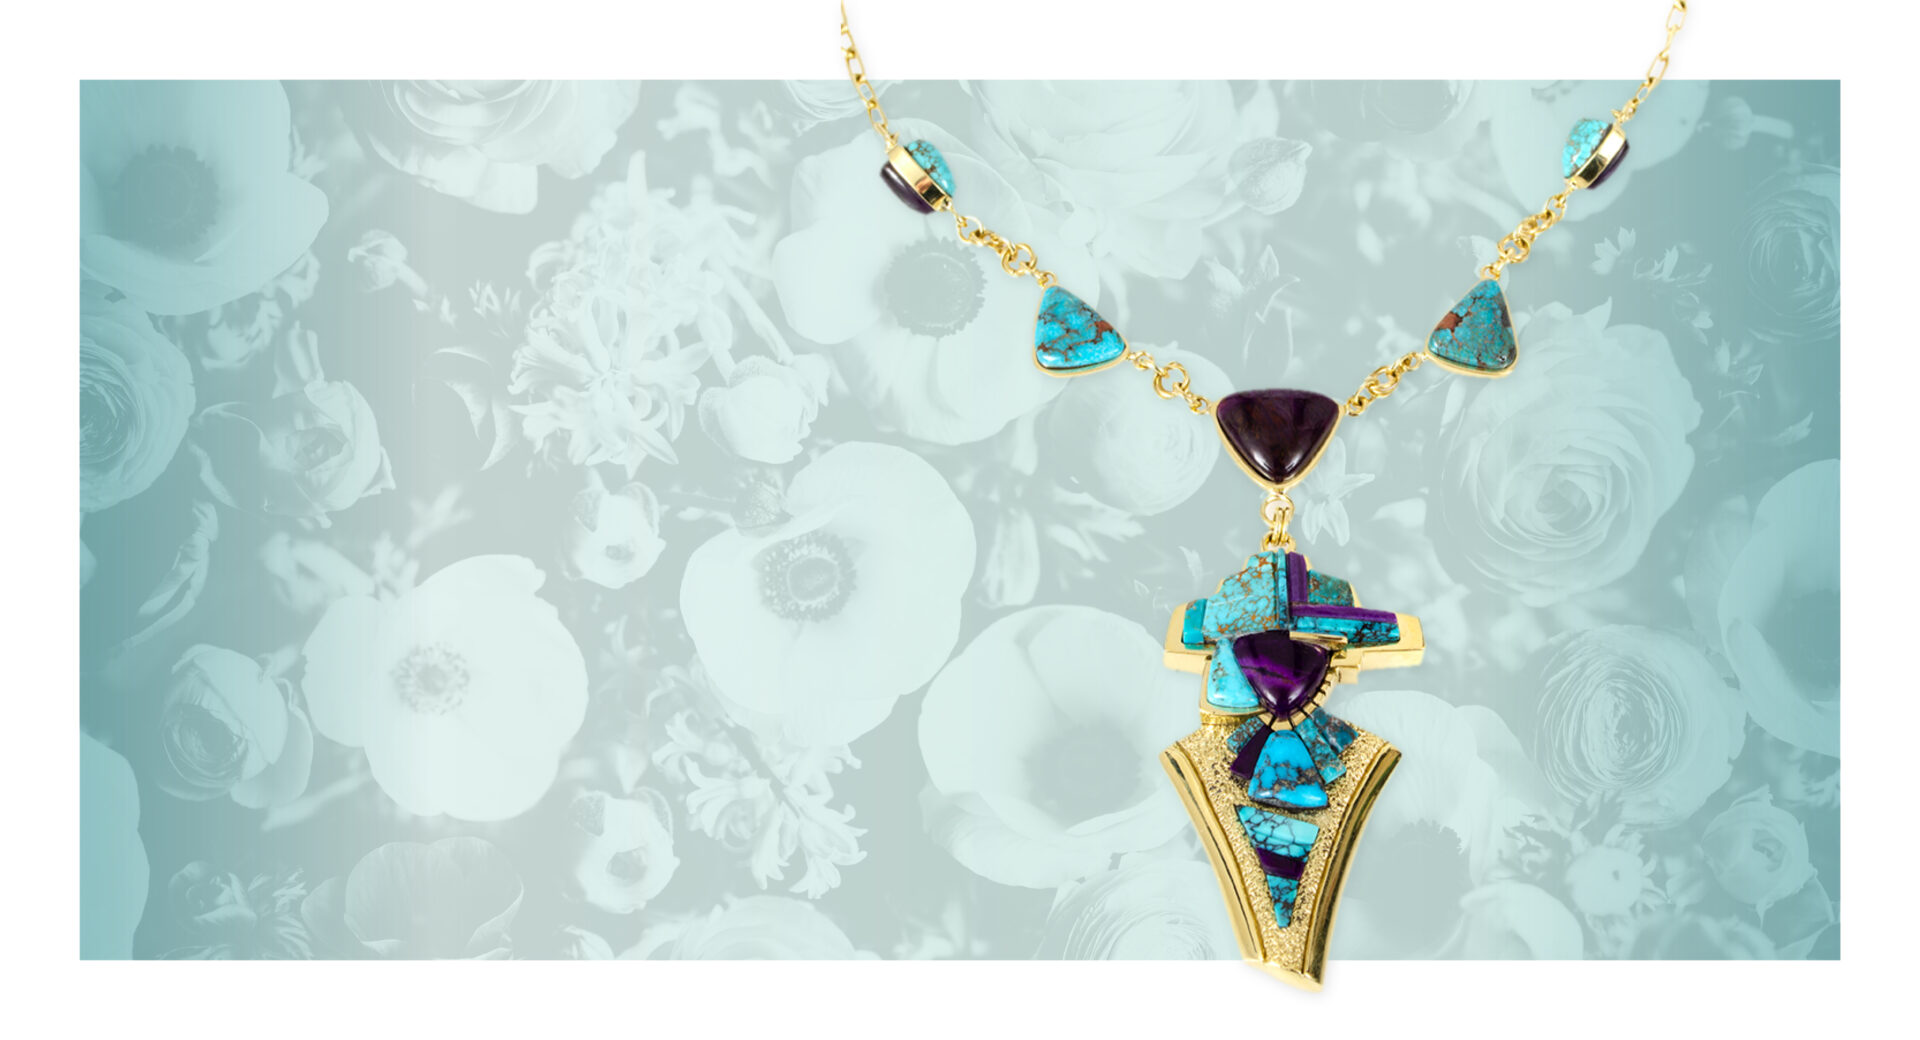 A necklace with turquoise and purple stones on a floral background.